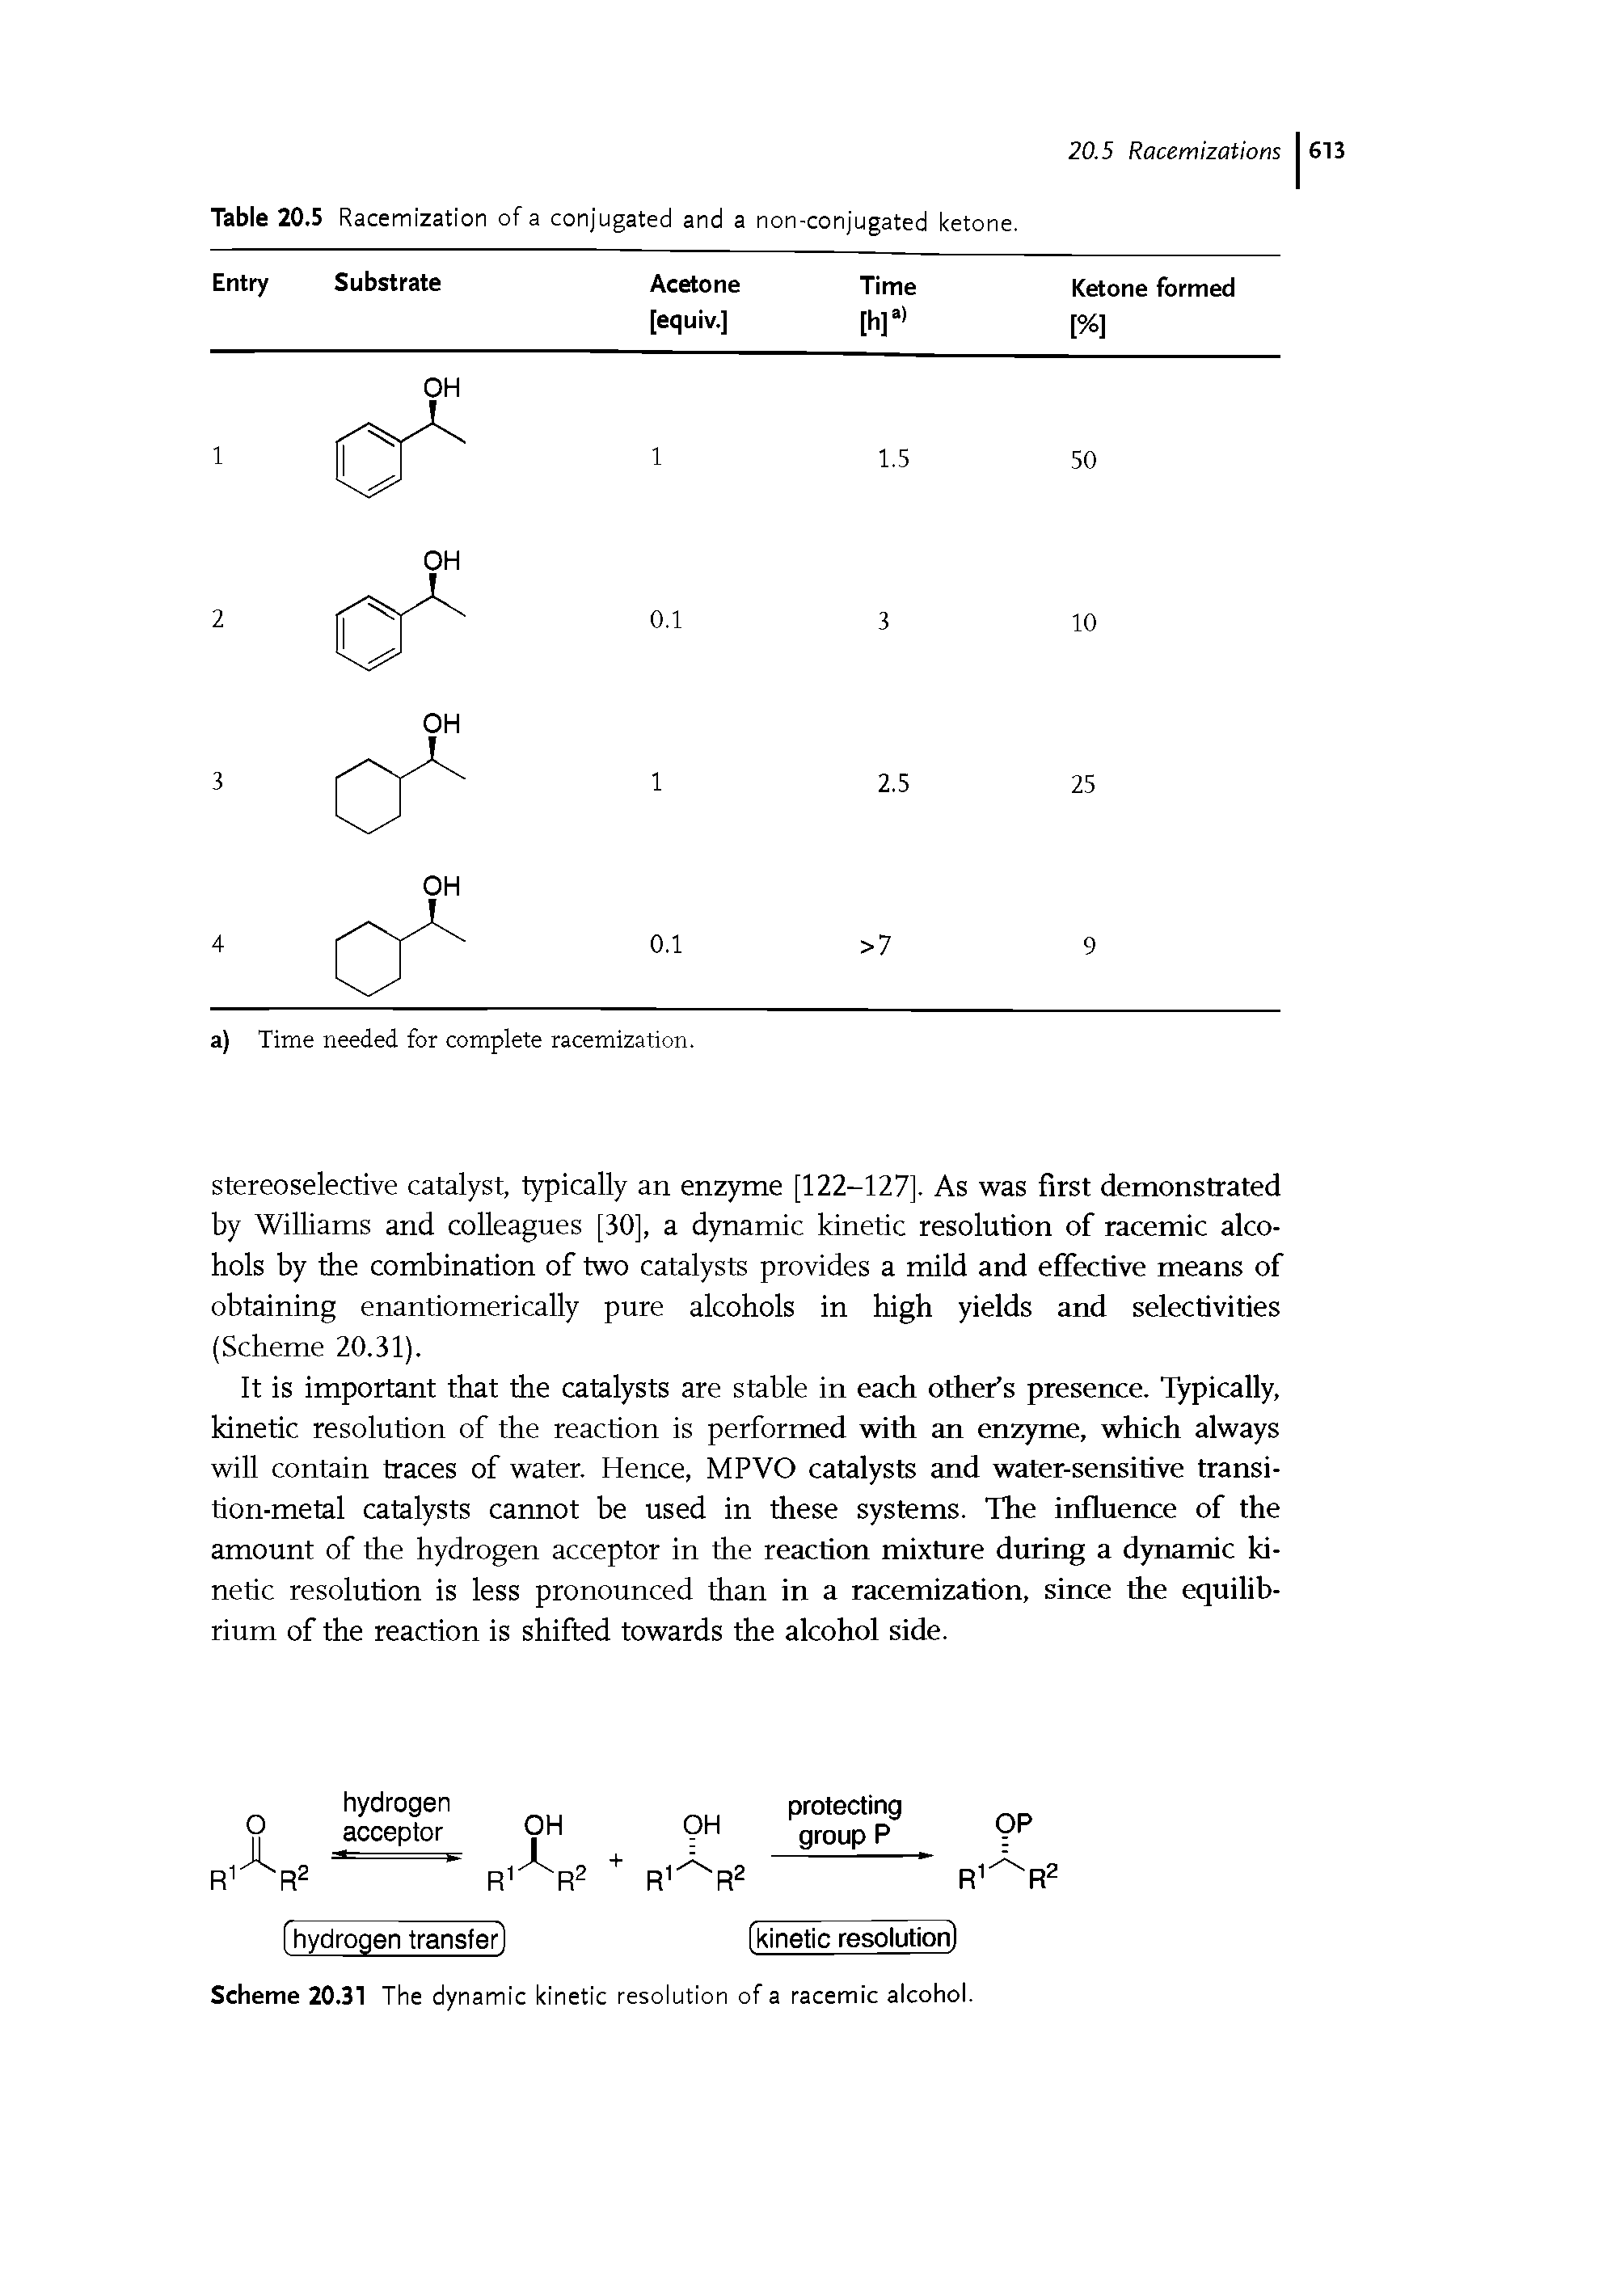 Scheme 20.31 The dynamic kinetic resolution of a racemic alcohol.